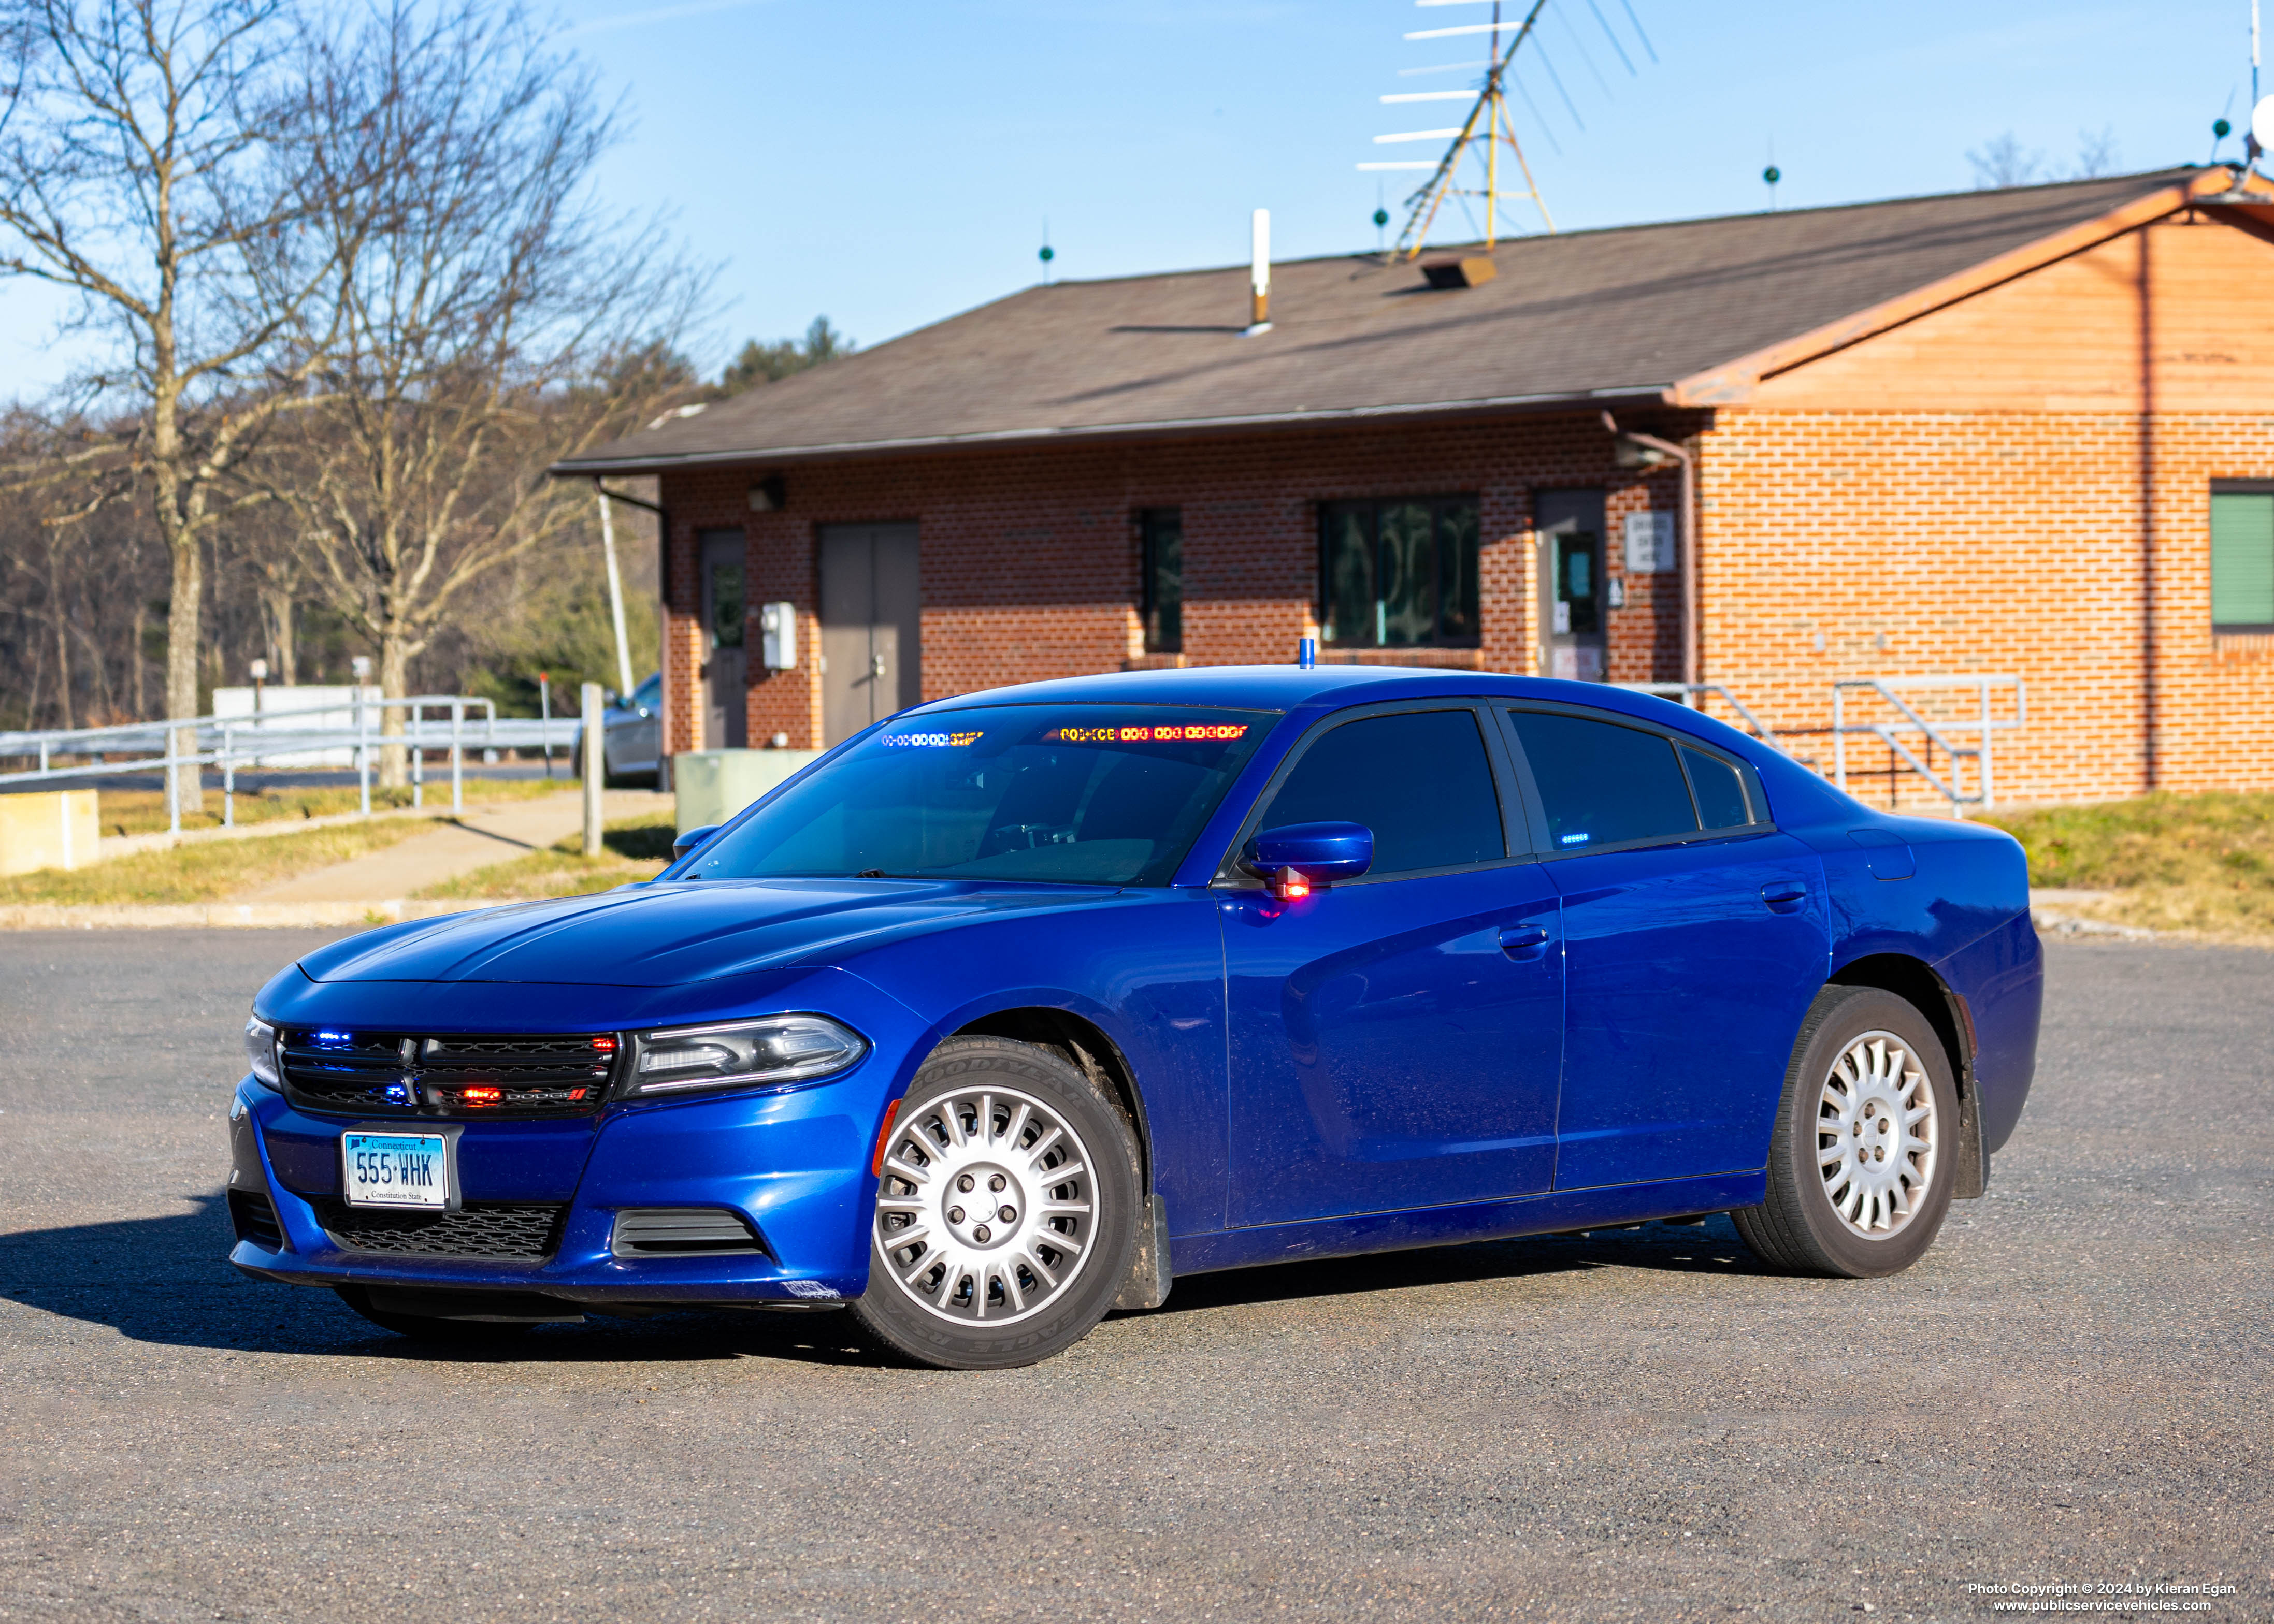 A photo  of Connecticut State Police
            Cruiser 555, a 2020 Dodge Charger             taken by Kieran Egan